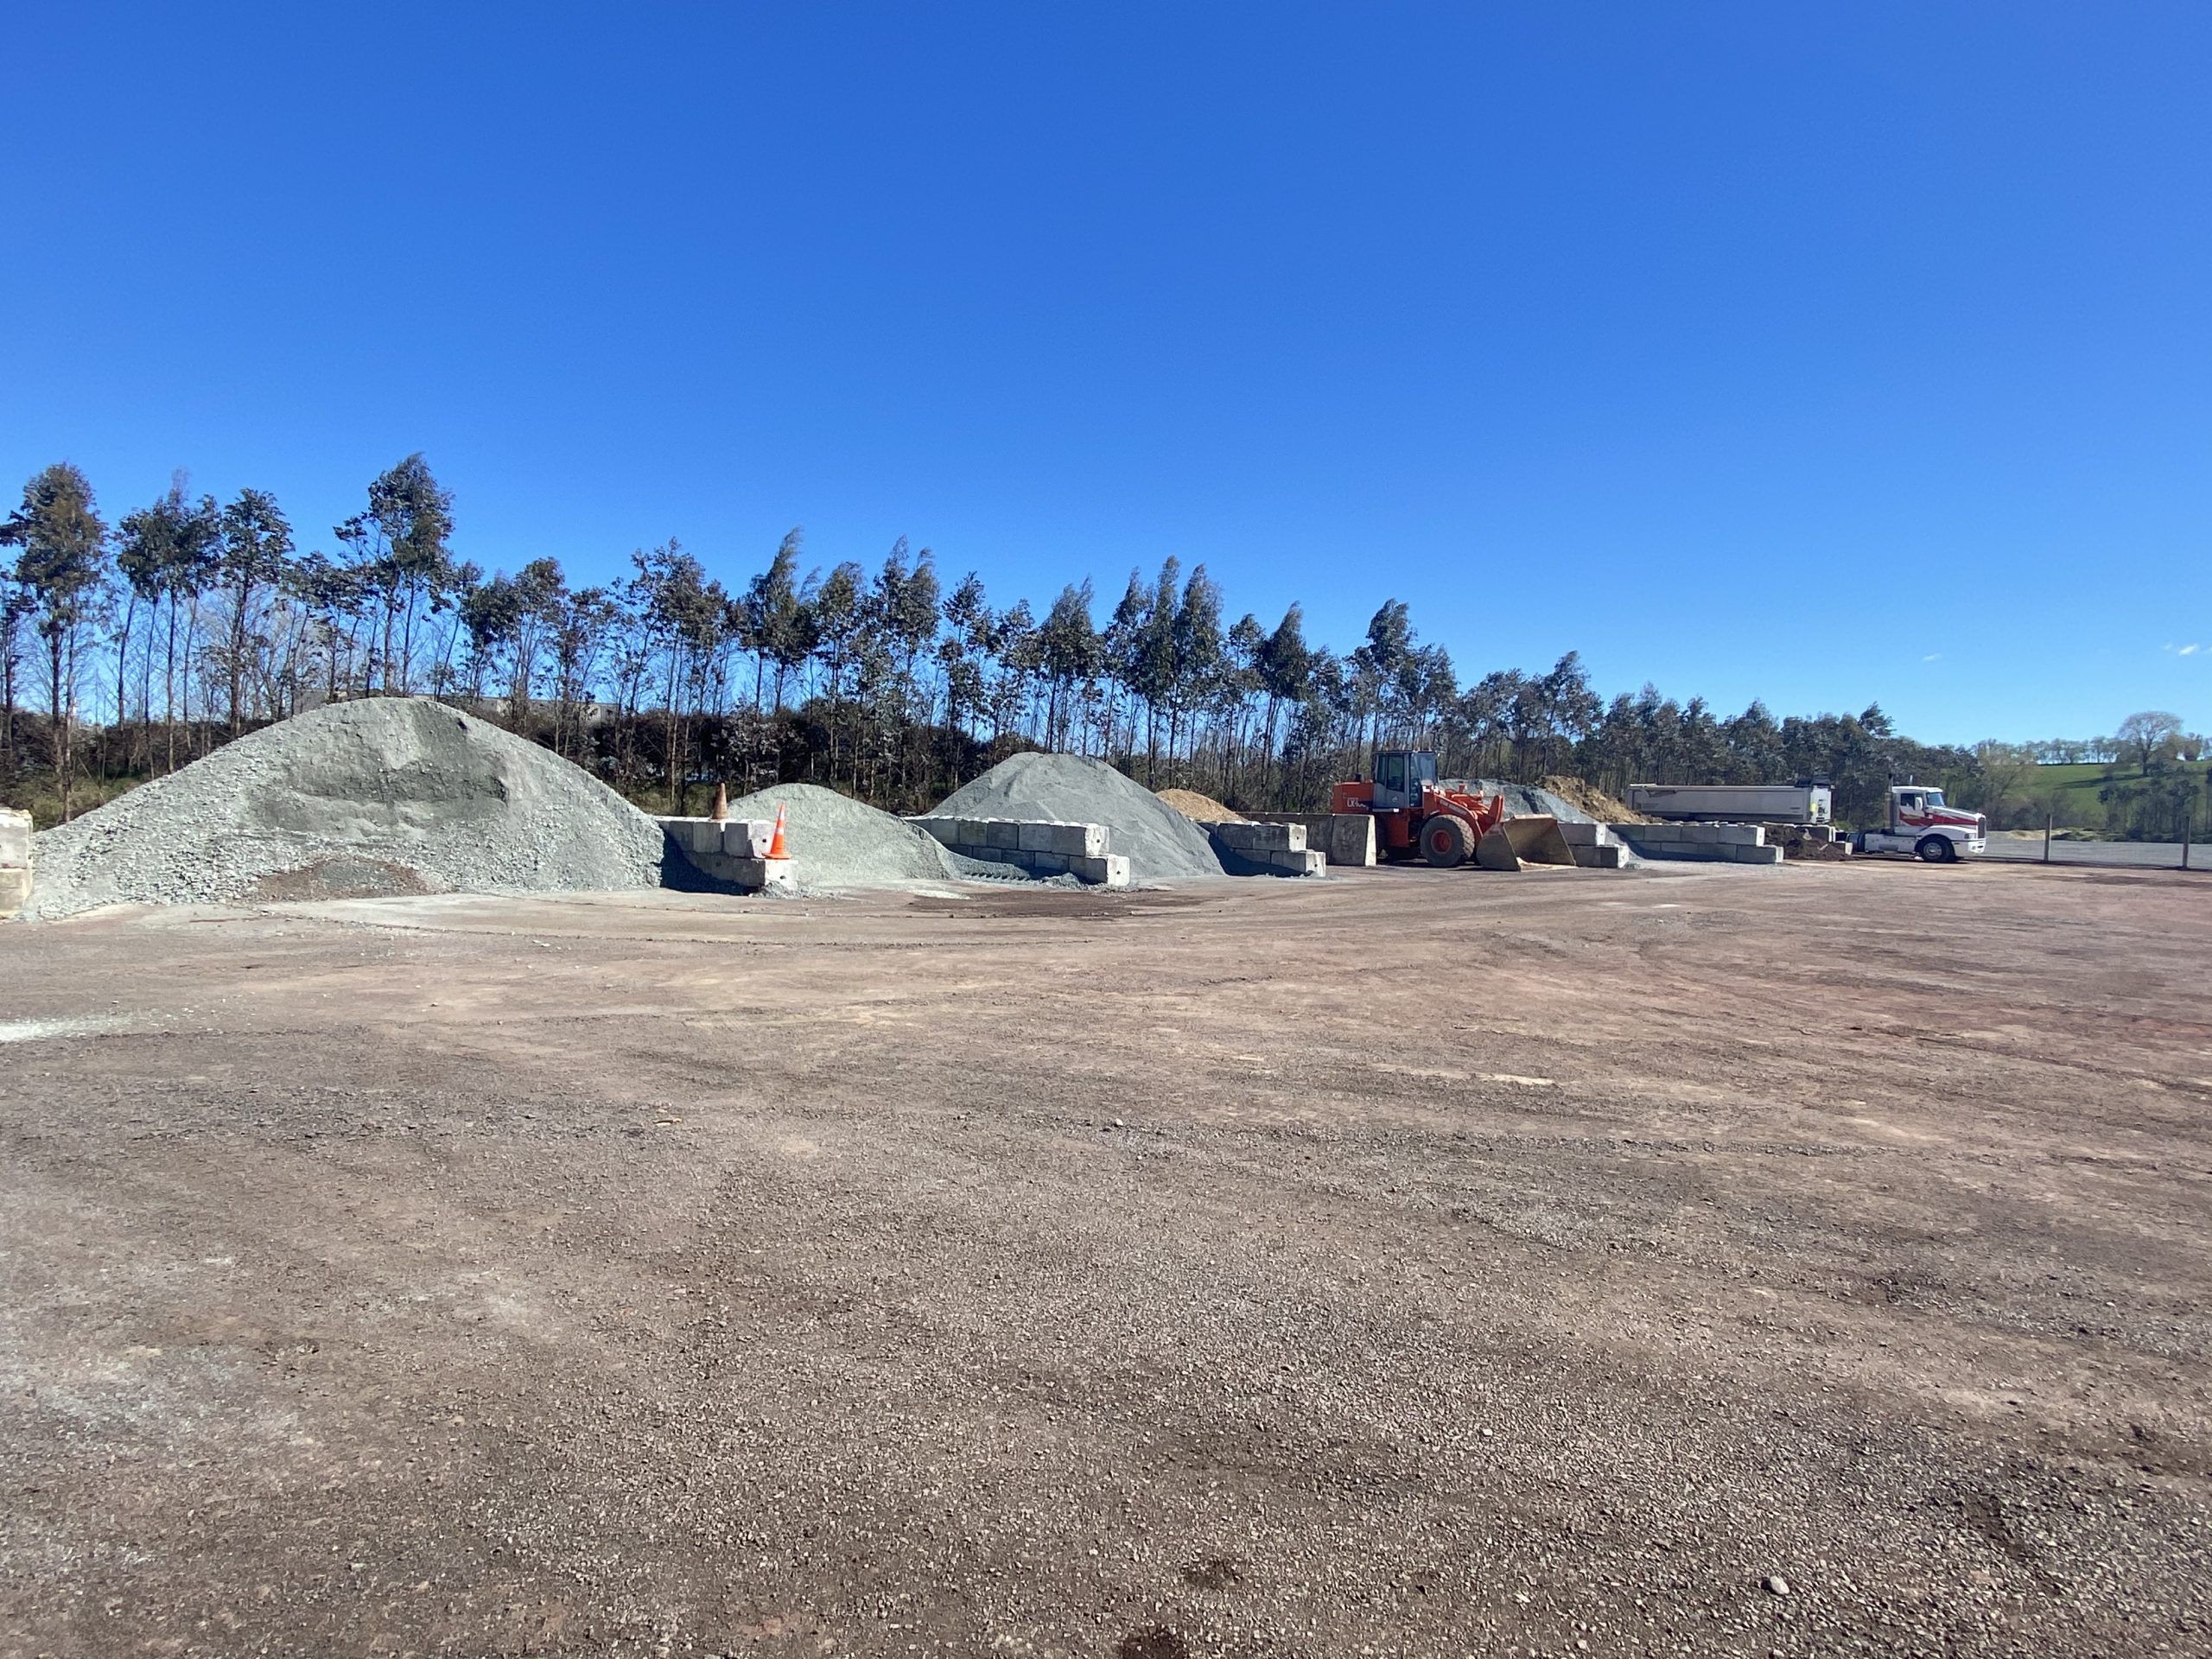 aggregate supplies and clean fill disposal